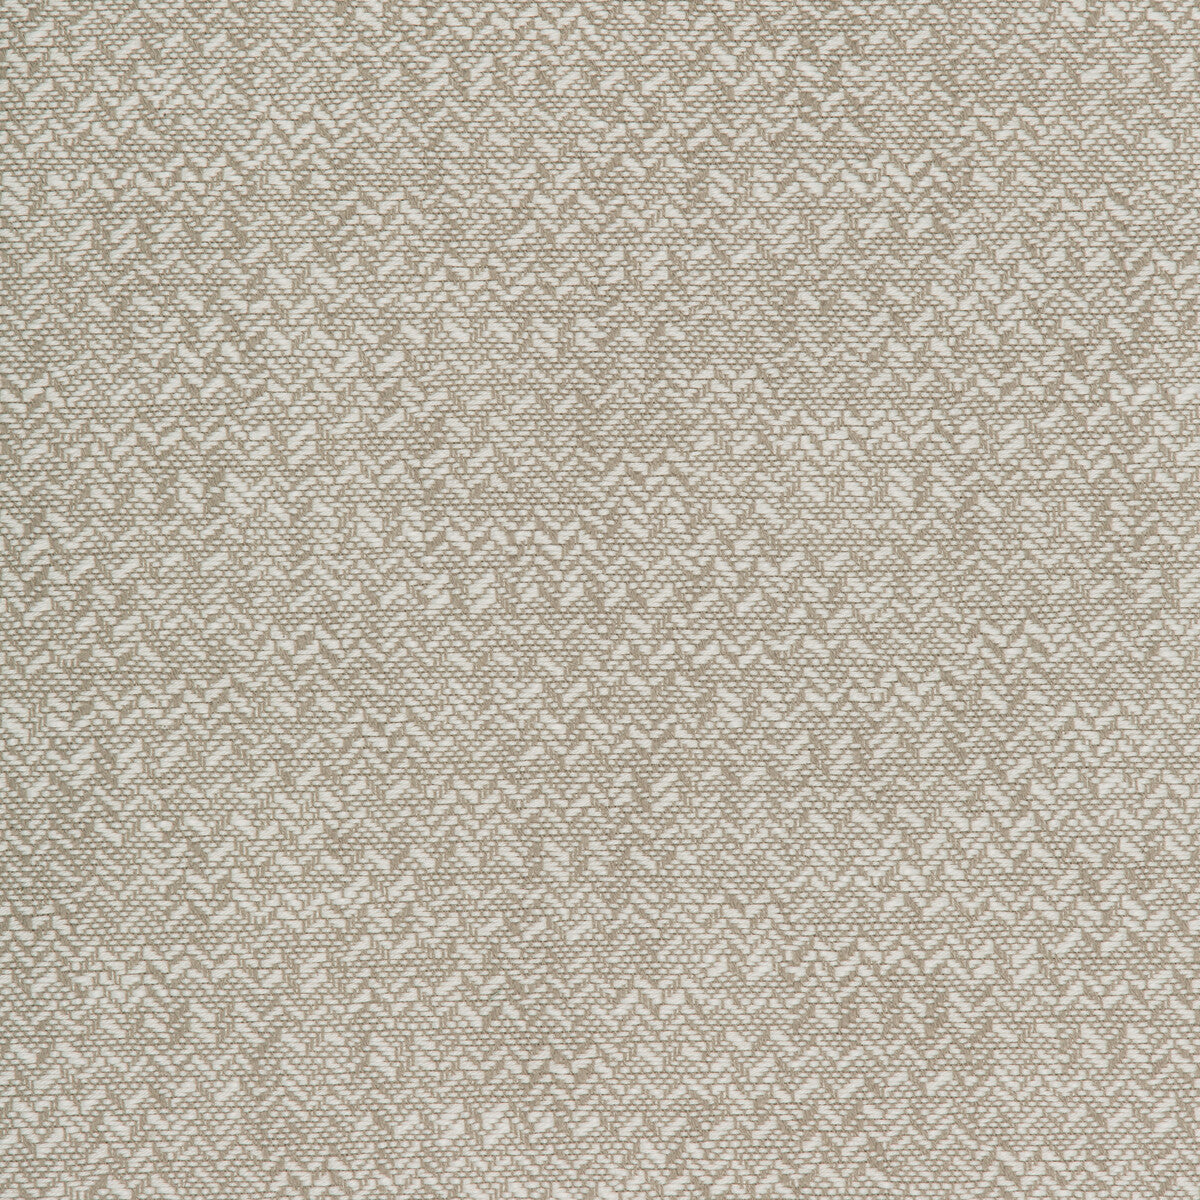 Kravet Design fabric in 36089-116 color - pattern 36089.116.0 - by Kravet Design in the Inside Out Performance Fabrics collection